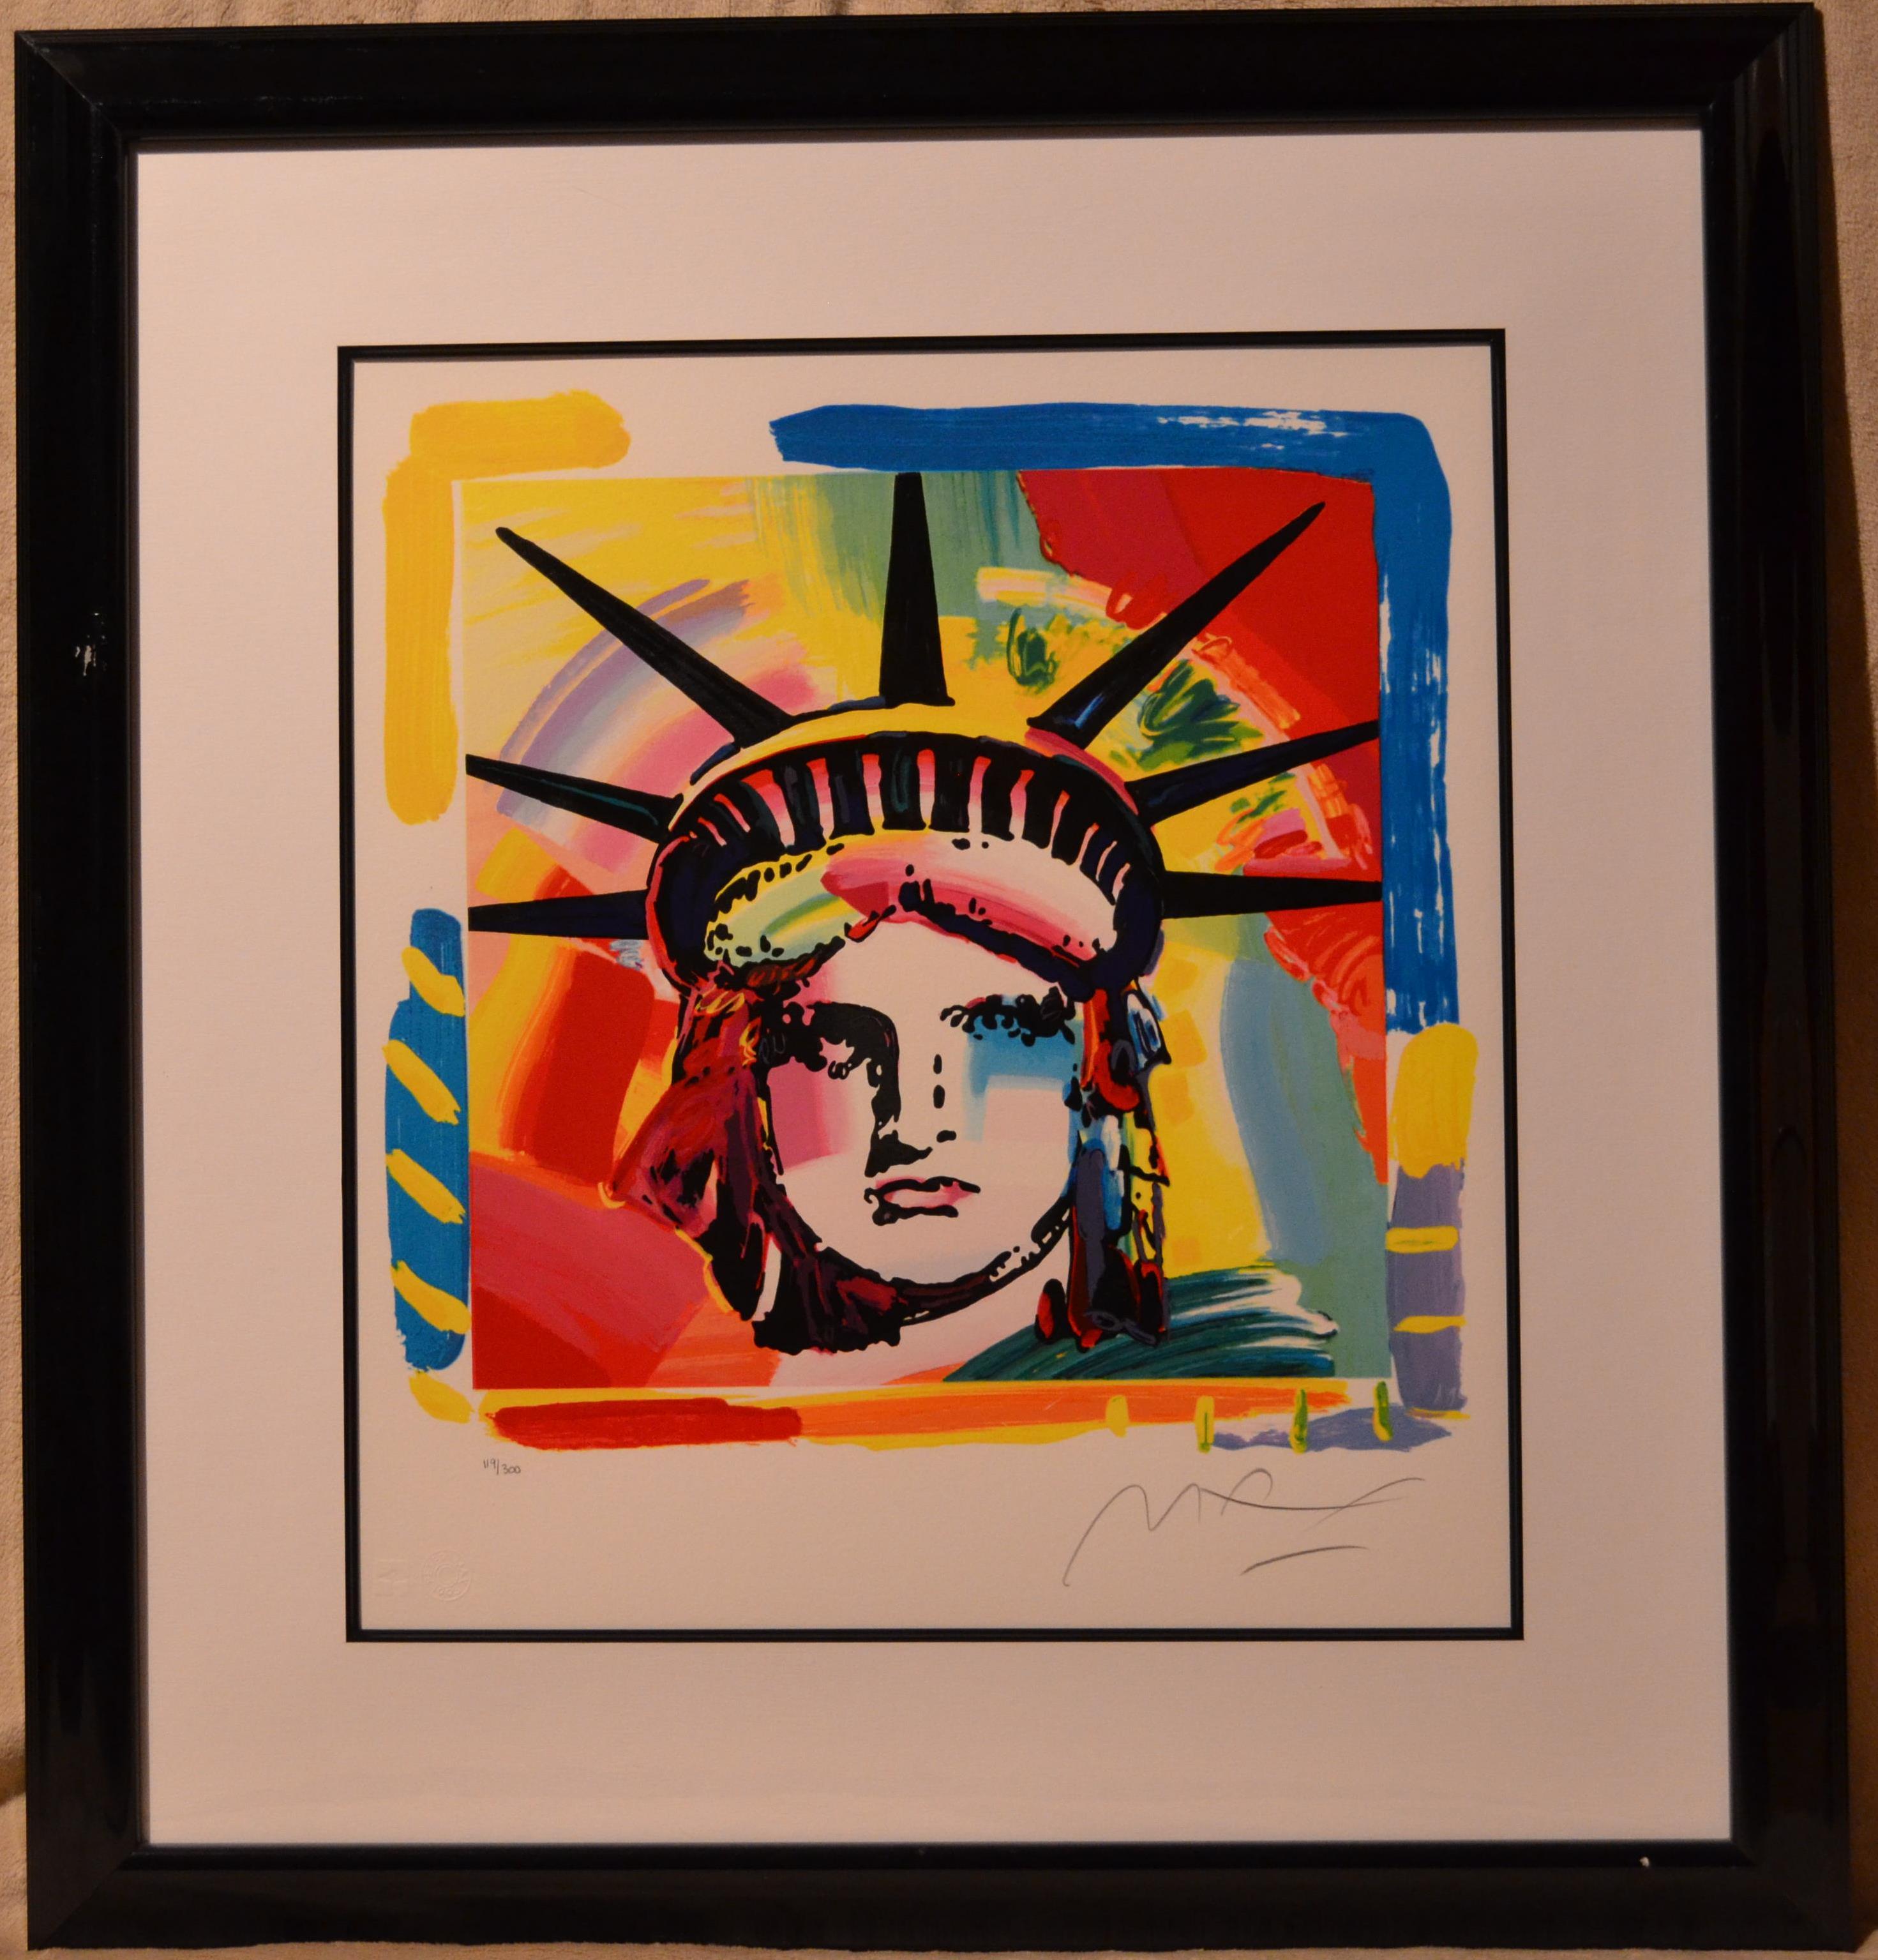 -- Liberty Head (The Complete Set of 4 Hand-Signed  and Numbered Color Lithographs) by Peter Max
-- Comes with a certificate of authenticity for the suite
-- High quality frames are included